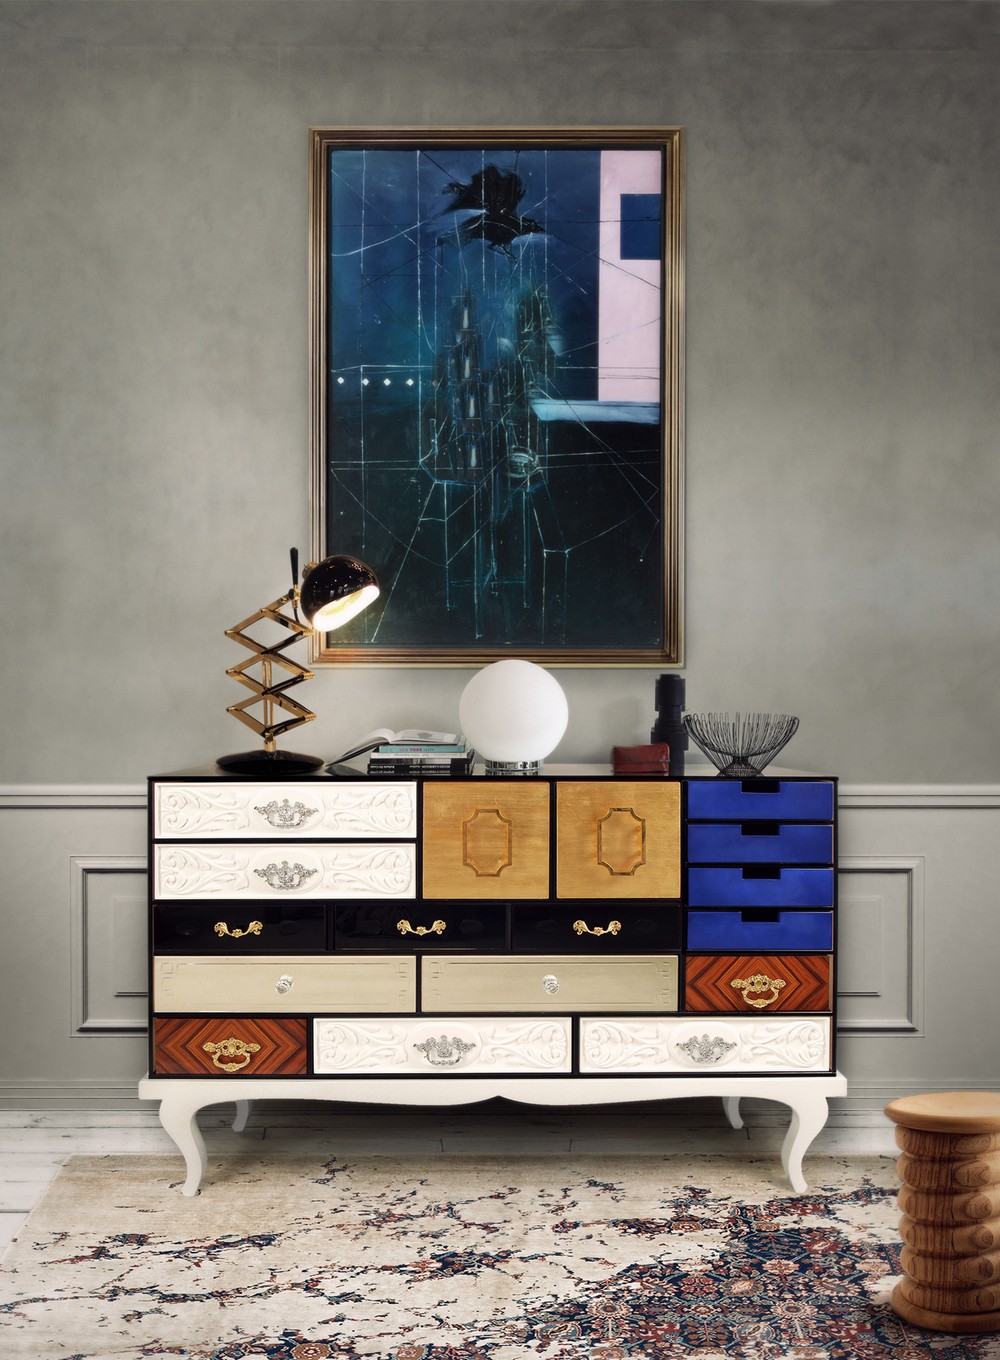 Contemporary Art Deco Furniture With a Hint of Art and Glamour